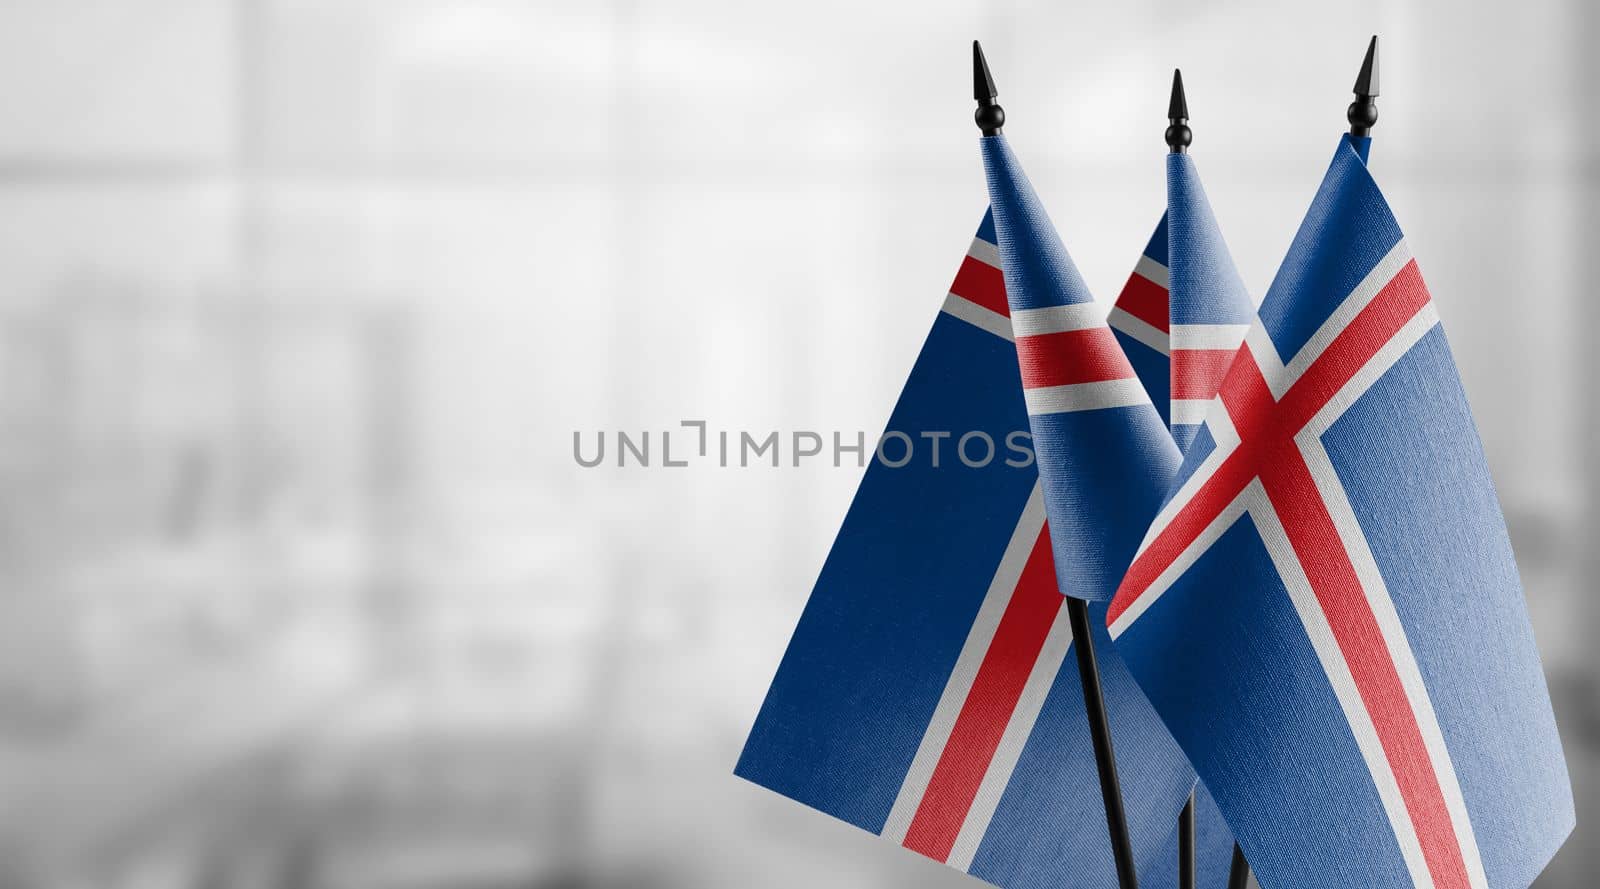 Small flags of the Iceland on an abstract blurry background by butenkow